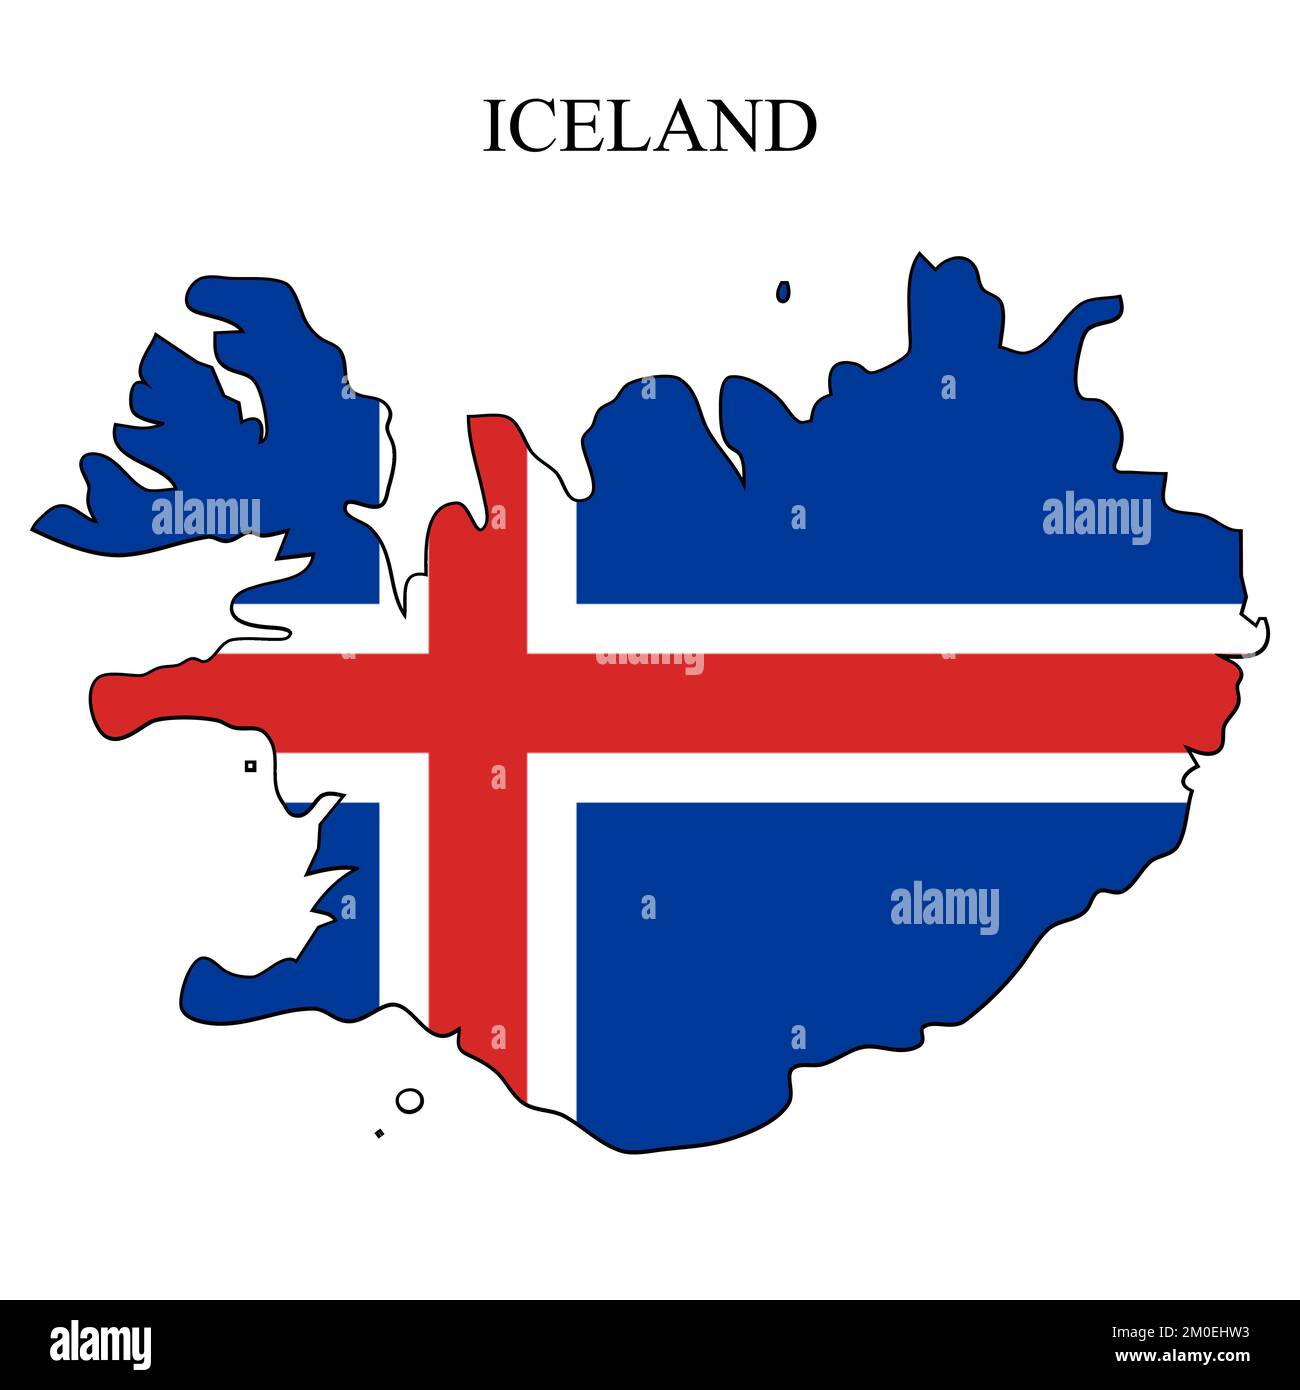 Iceland map vector illustration. Global economy. Famous country. Northern Europe. Europe. Scandinavian region. Stock Vector